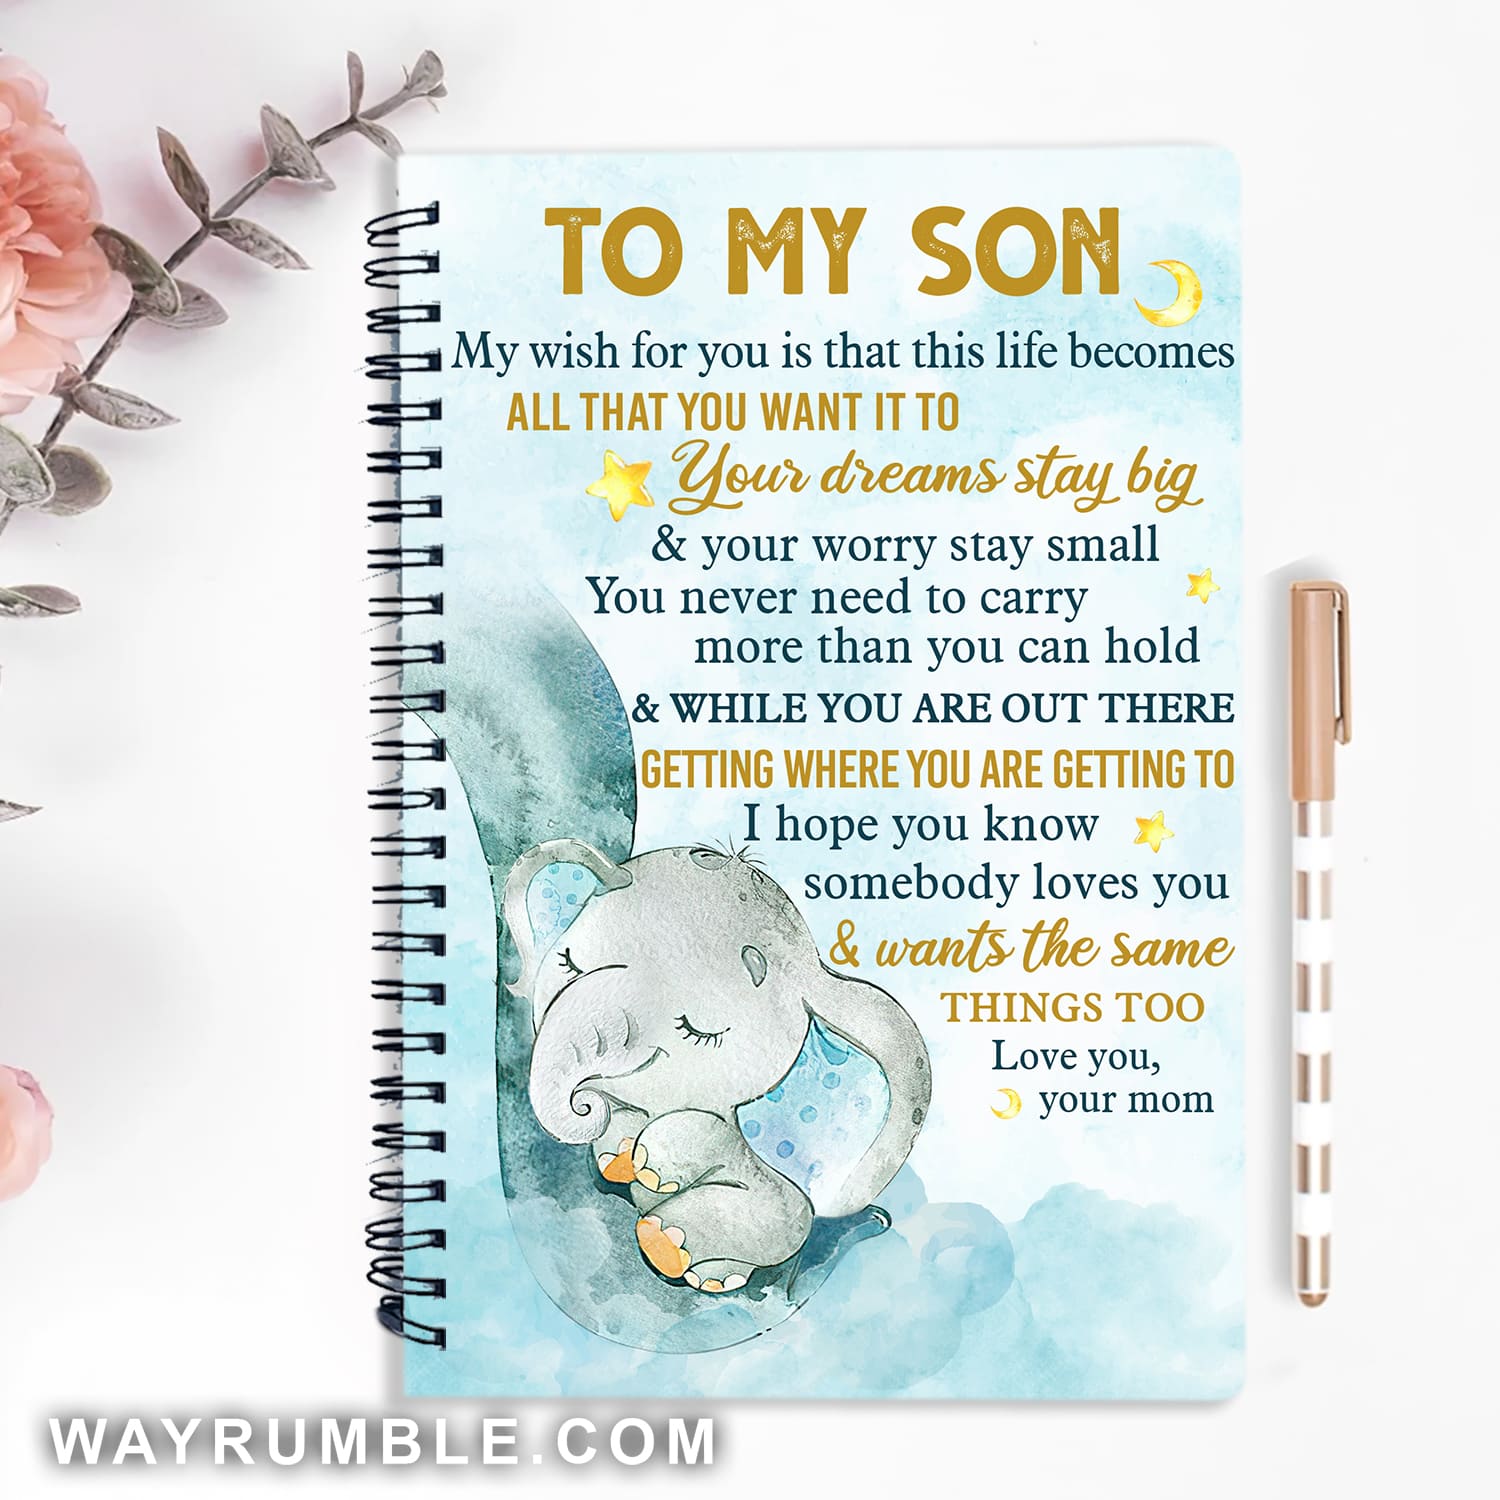 I hope you know somebody loves you - Mom to son, Baby elephant, Sky Spiral Journal